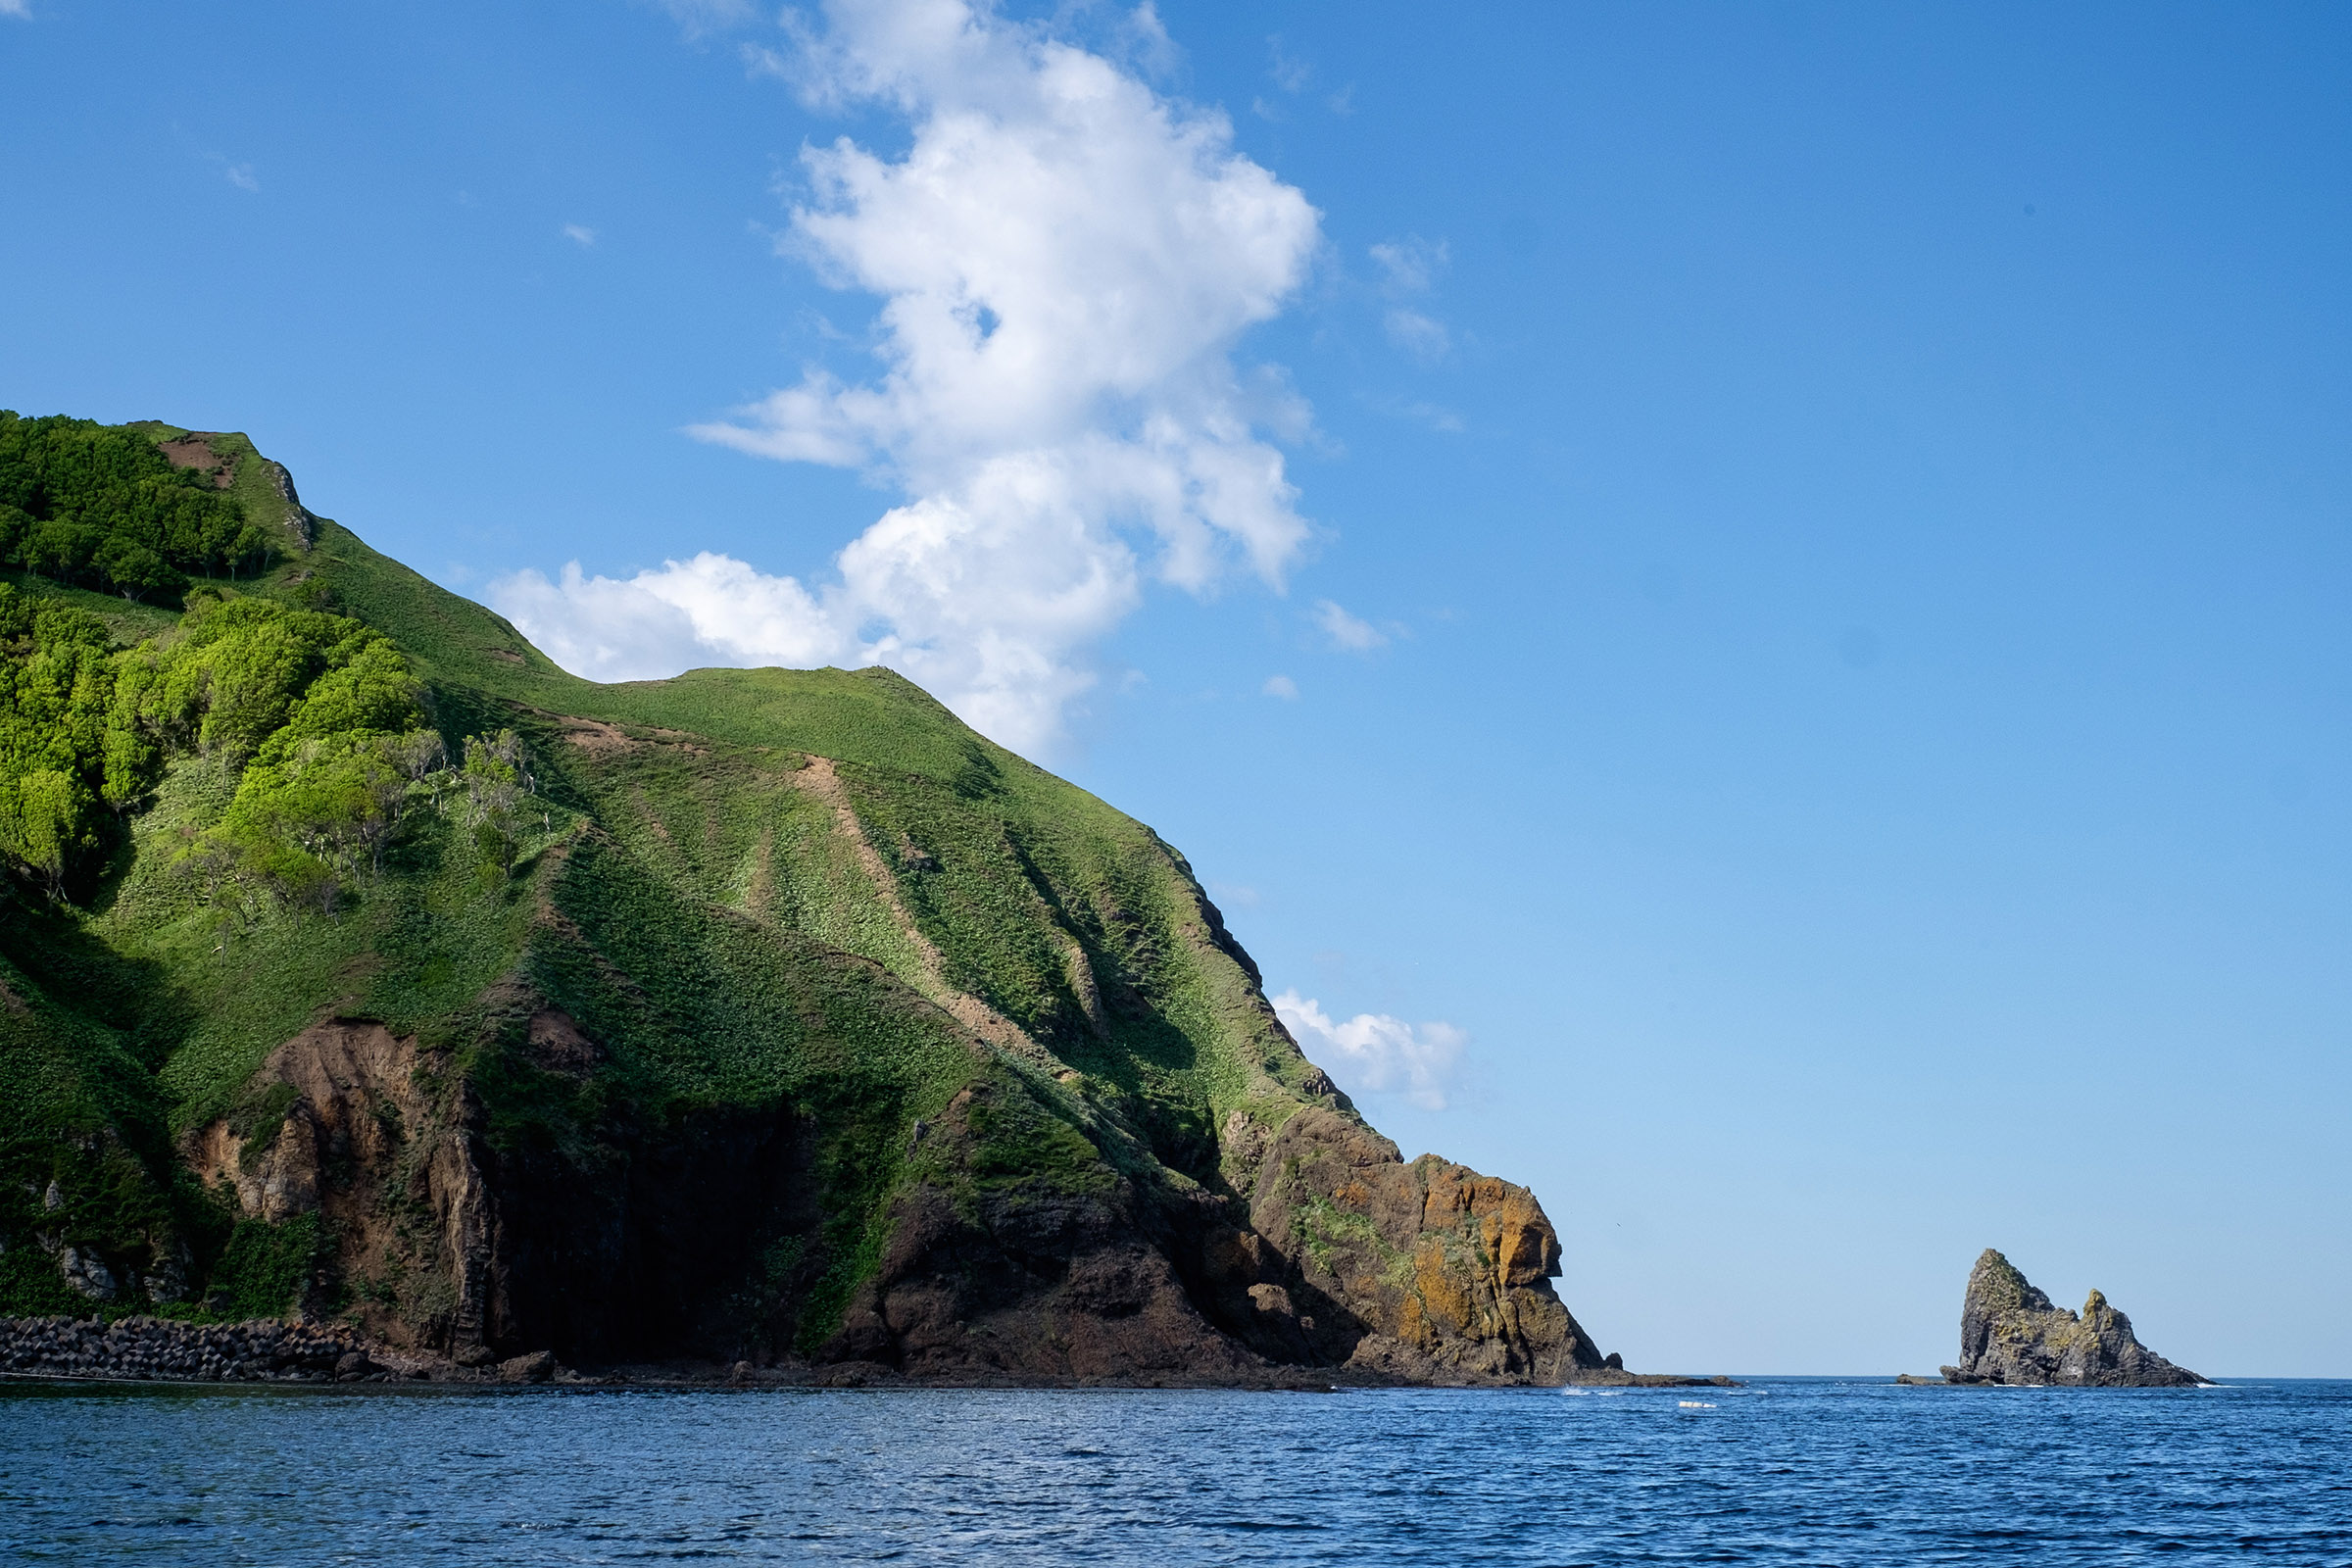 Green cliffs rise dramatically out of the sea on the Shiretoko peninsula. The water is relatively calm and white clouds float in the sky above a high hill. A jagged rock sits off the coast.